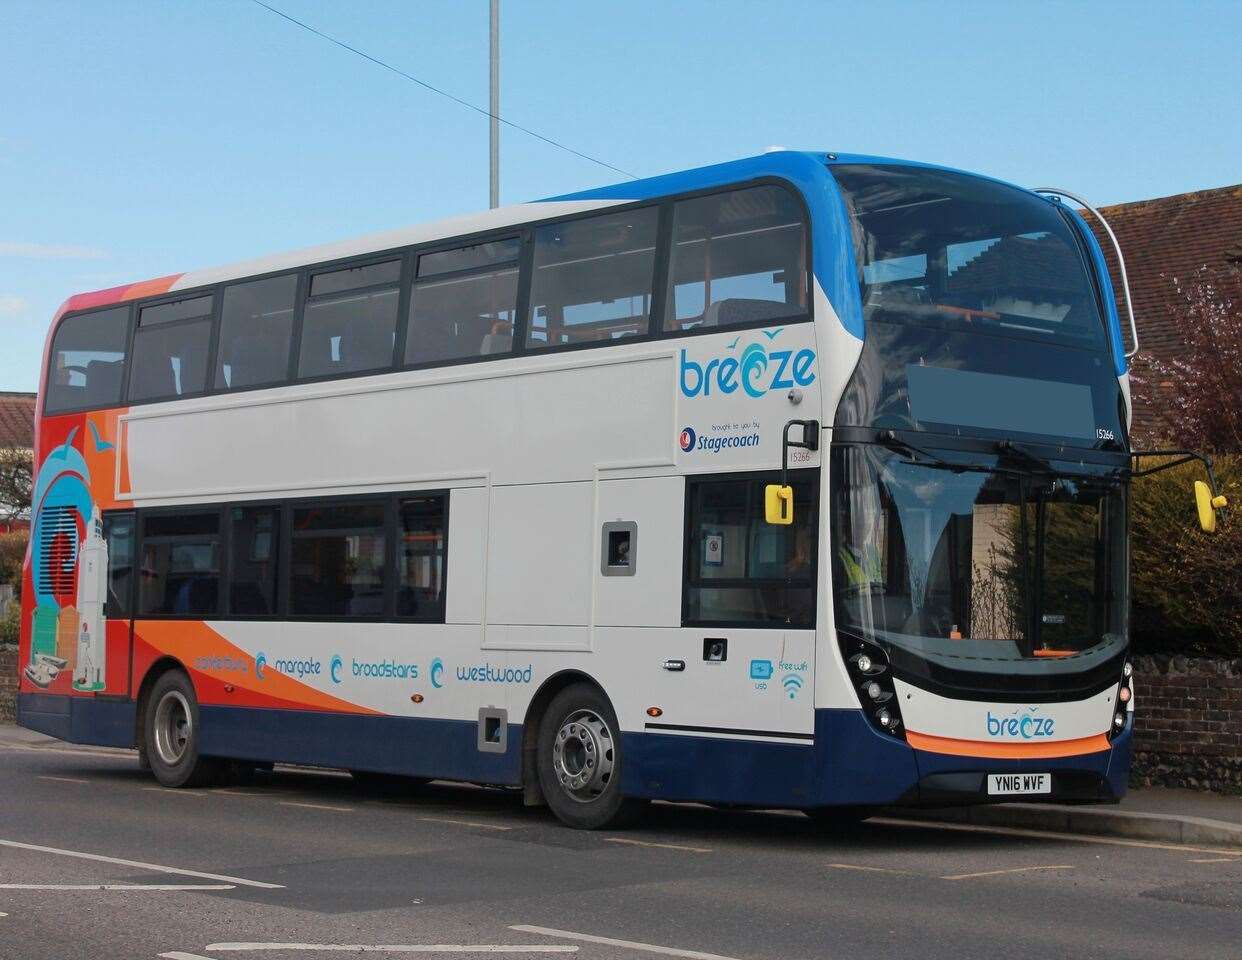 Stagecoach has warned passengers they might have to wait for the next service